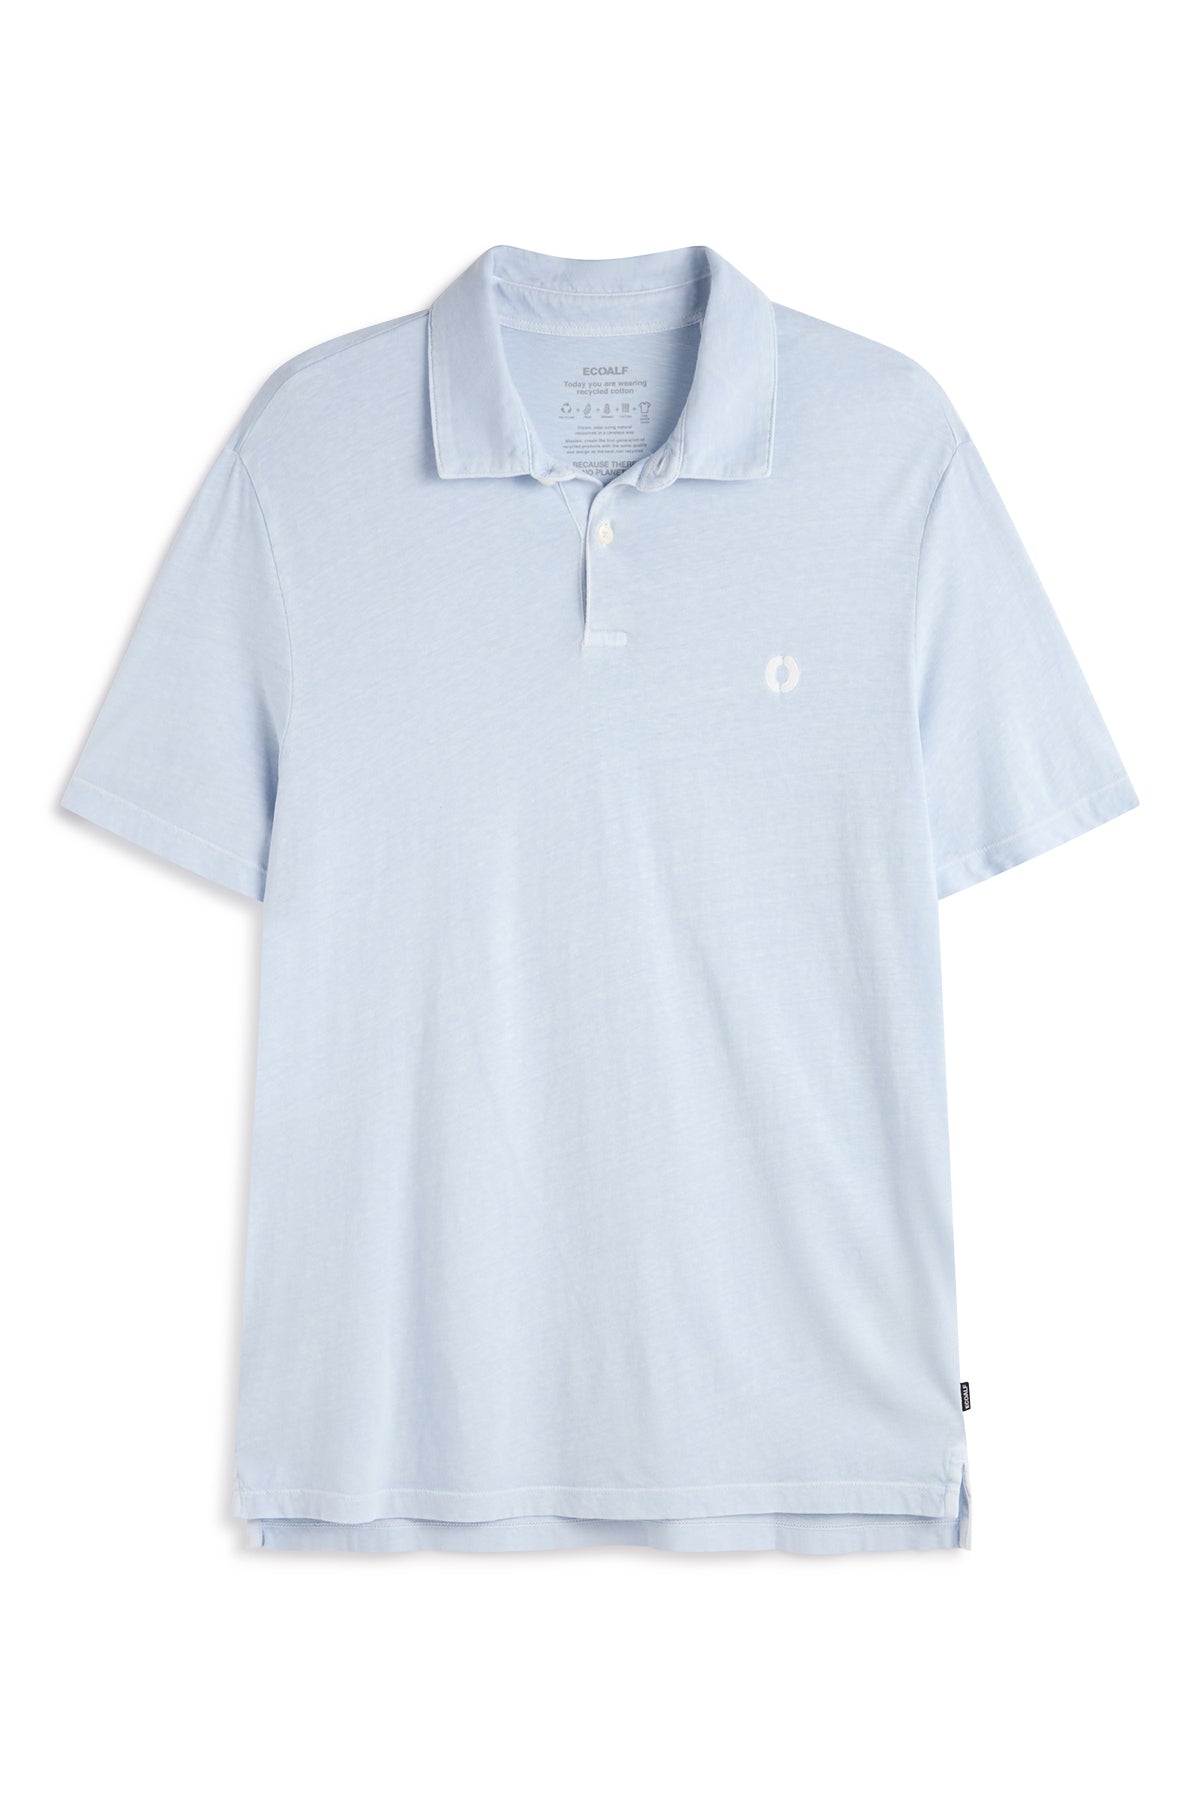 BLUE THEO JERSEY POLO SHIRT